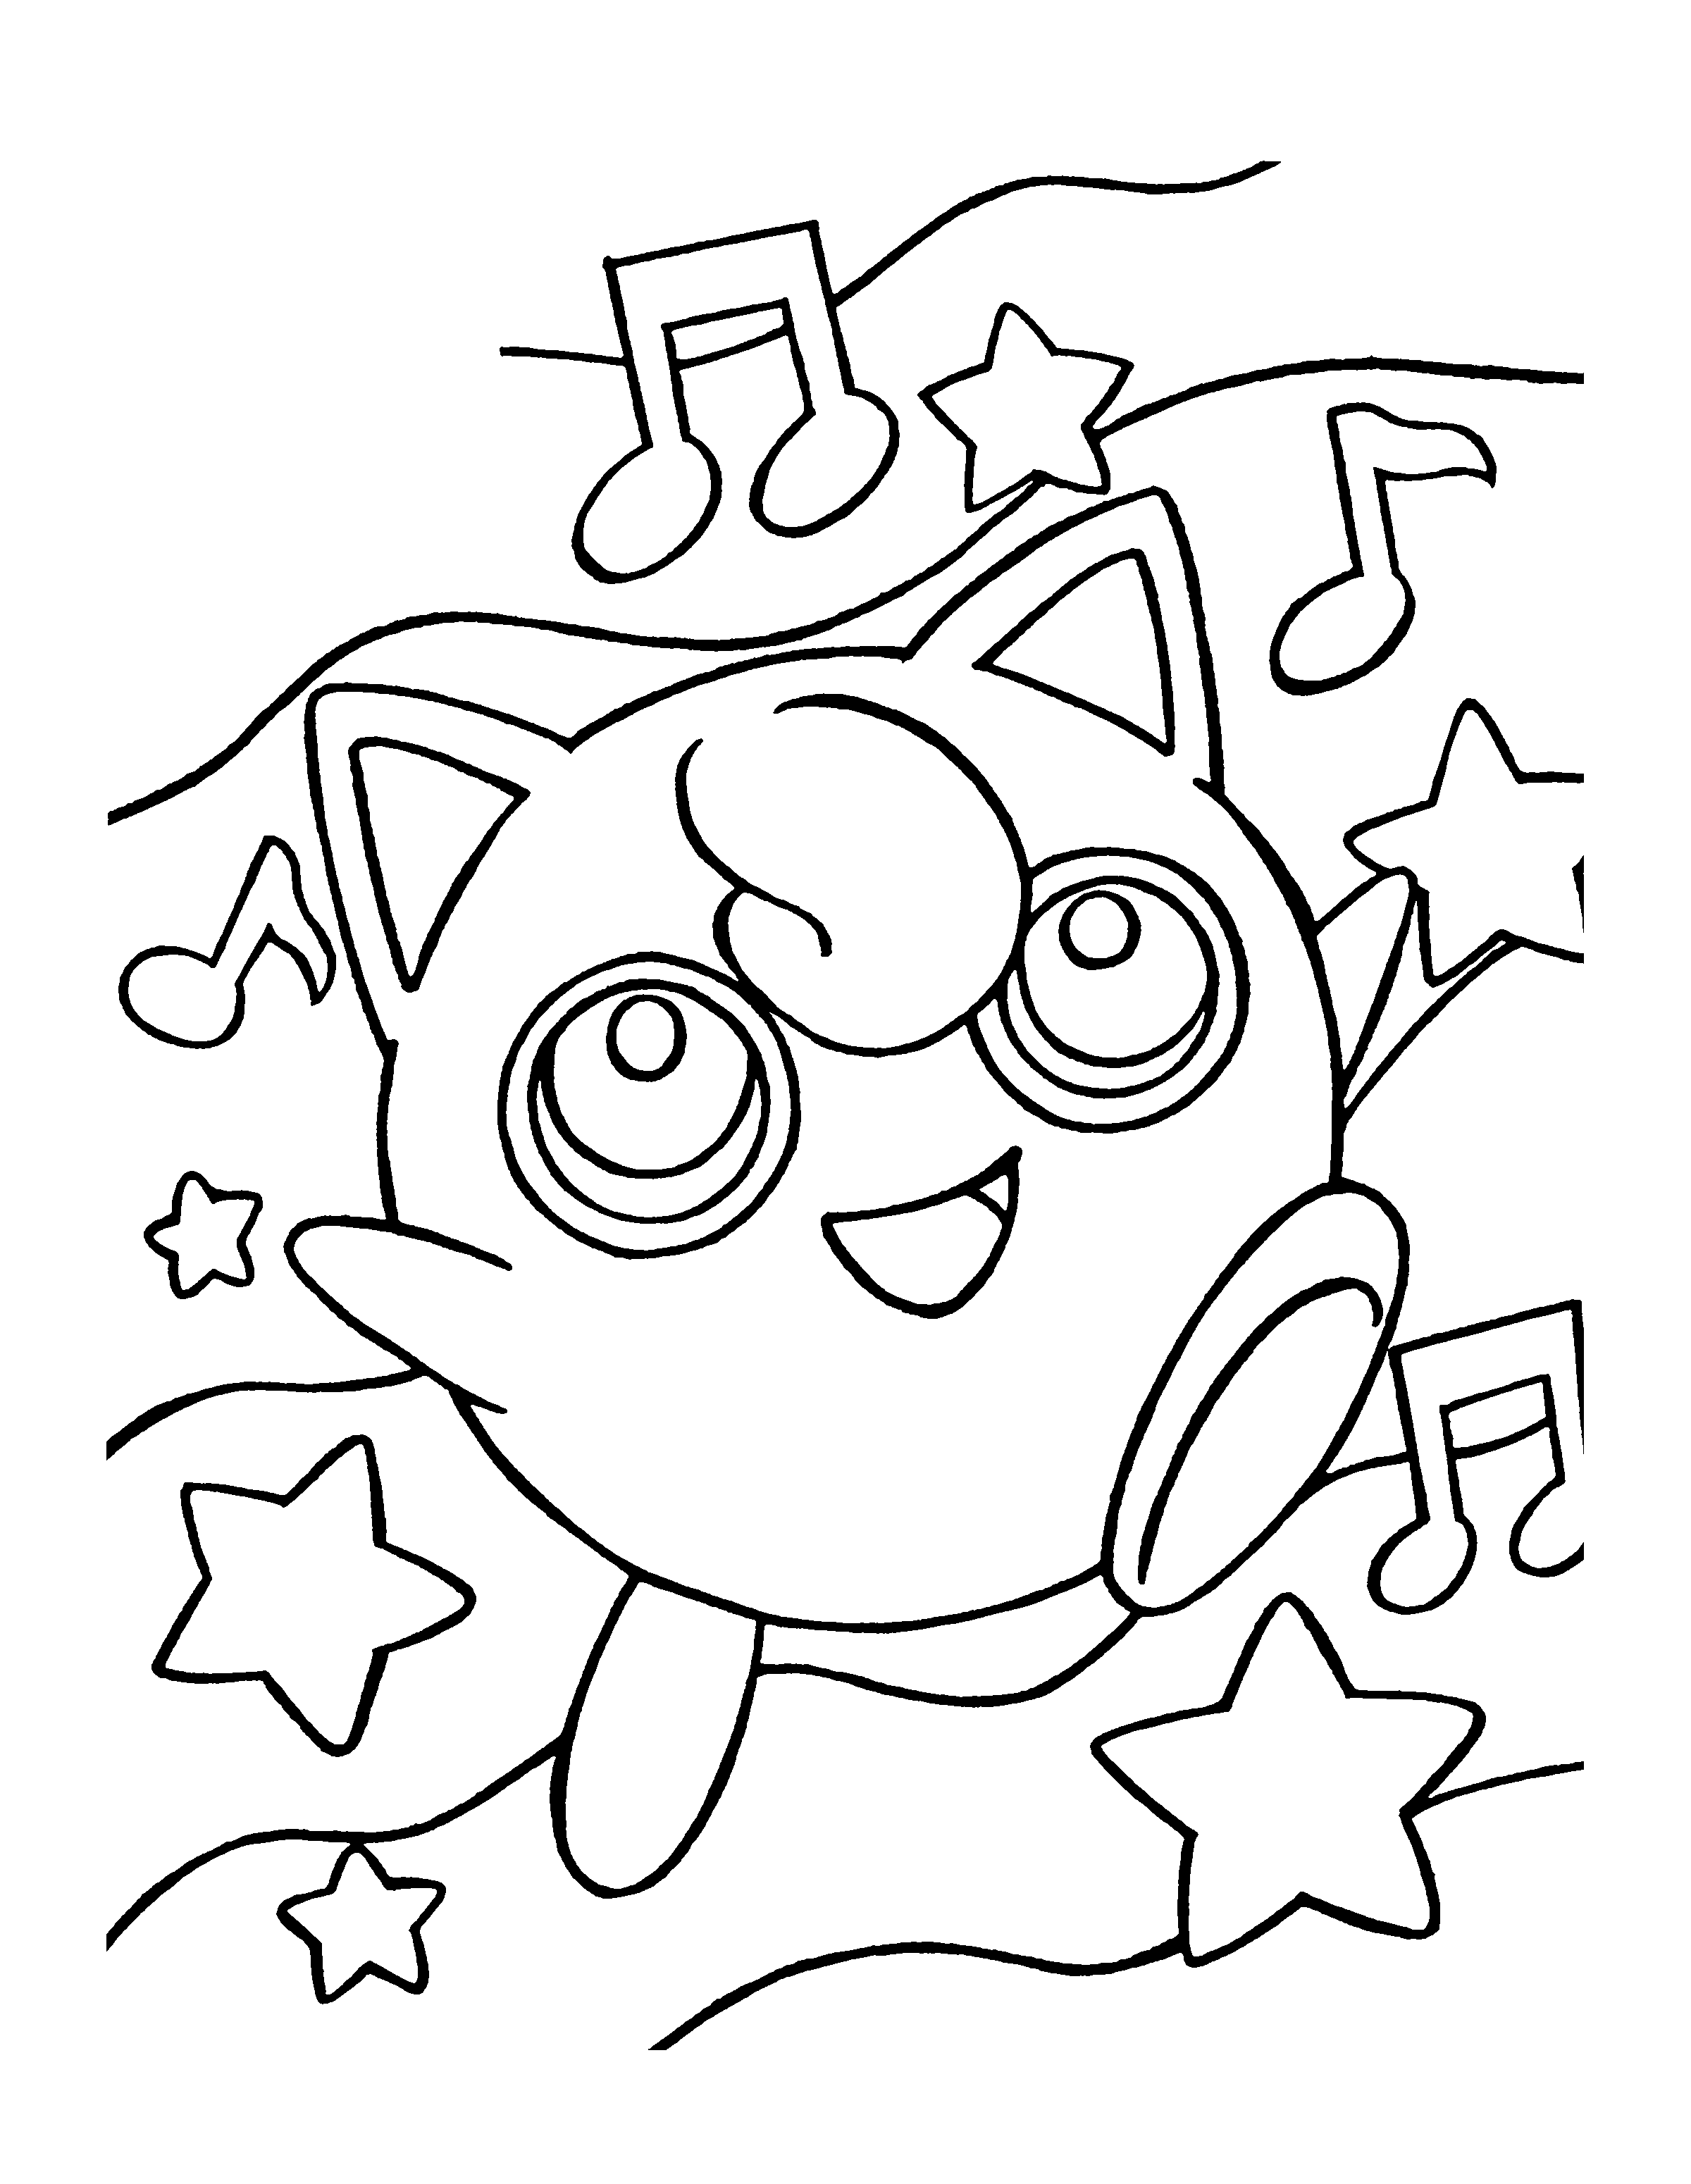  Pokemon coloring pages | Kids coloring pages | #6